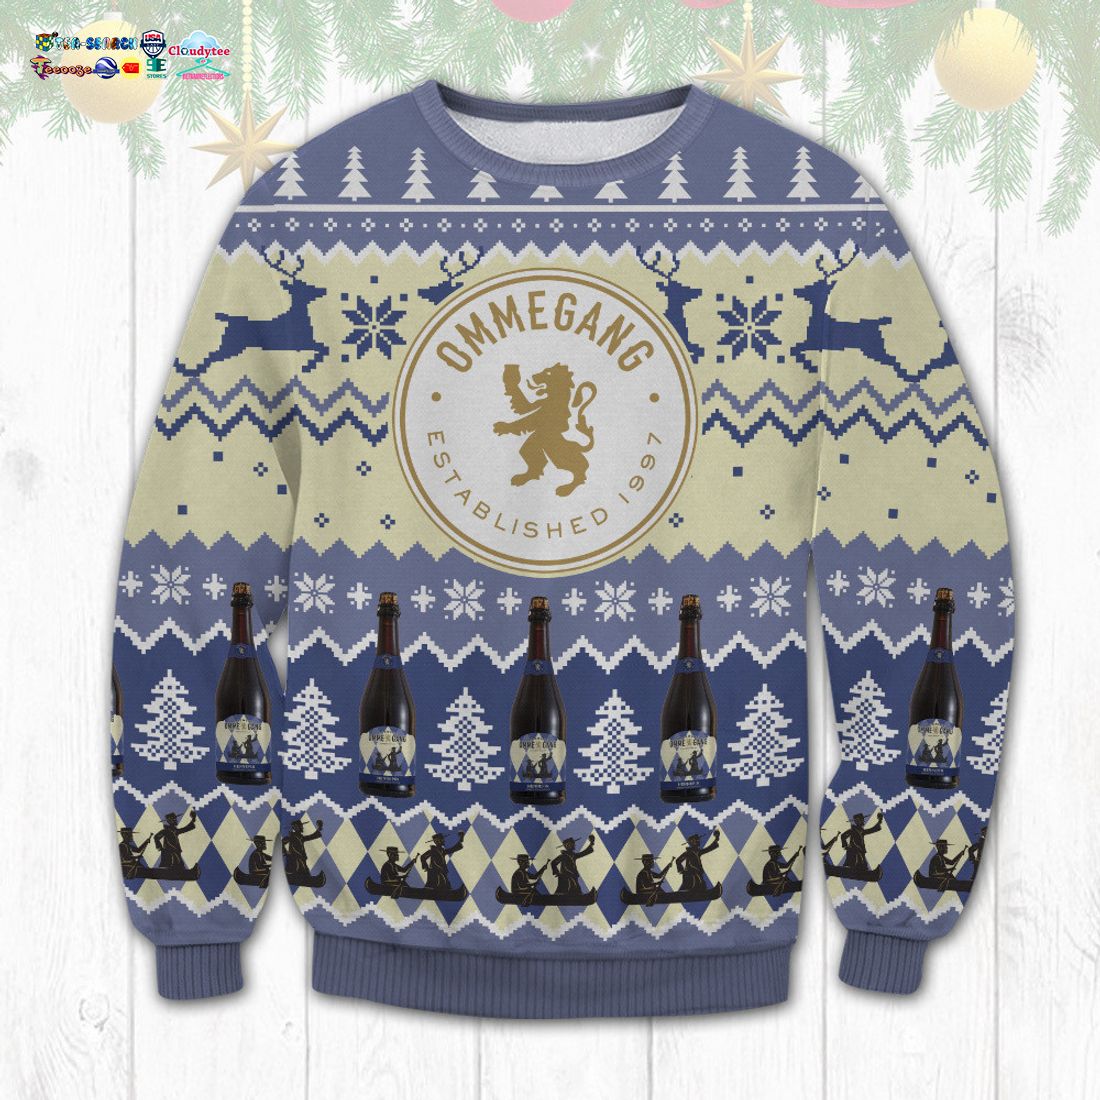 Ommegang Ugly Christmas Sweater